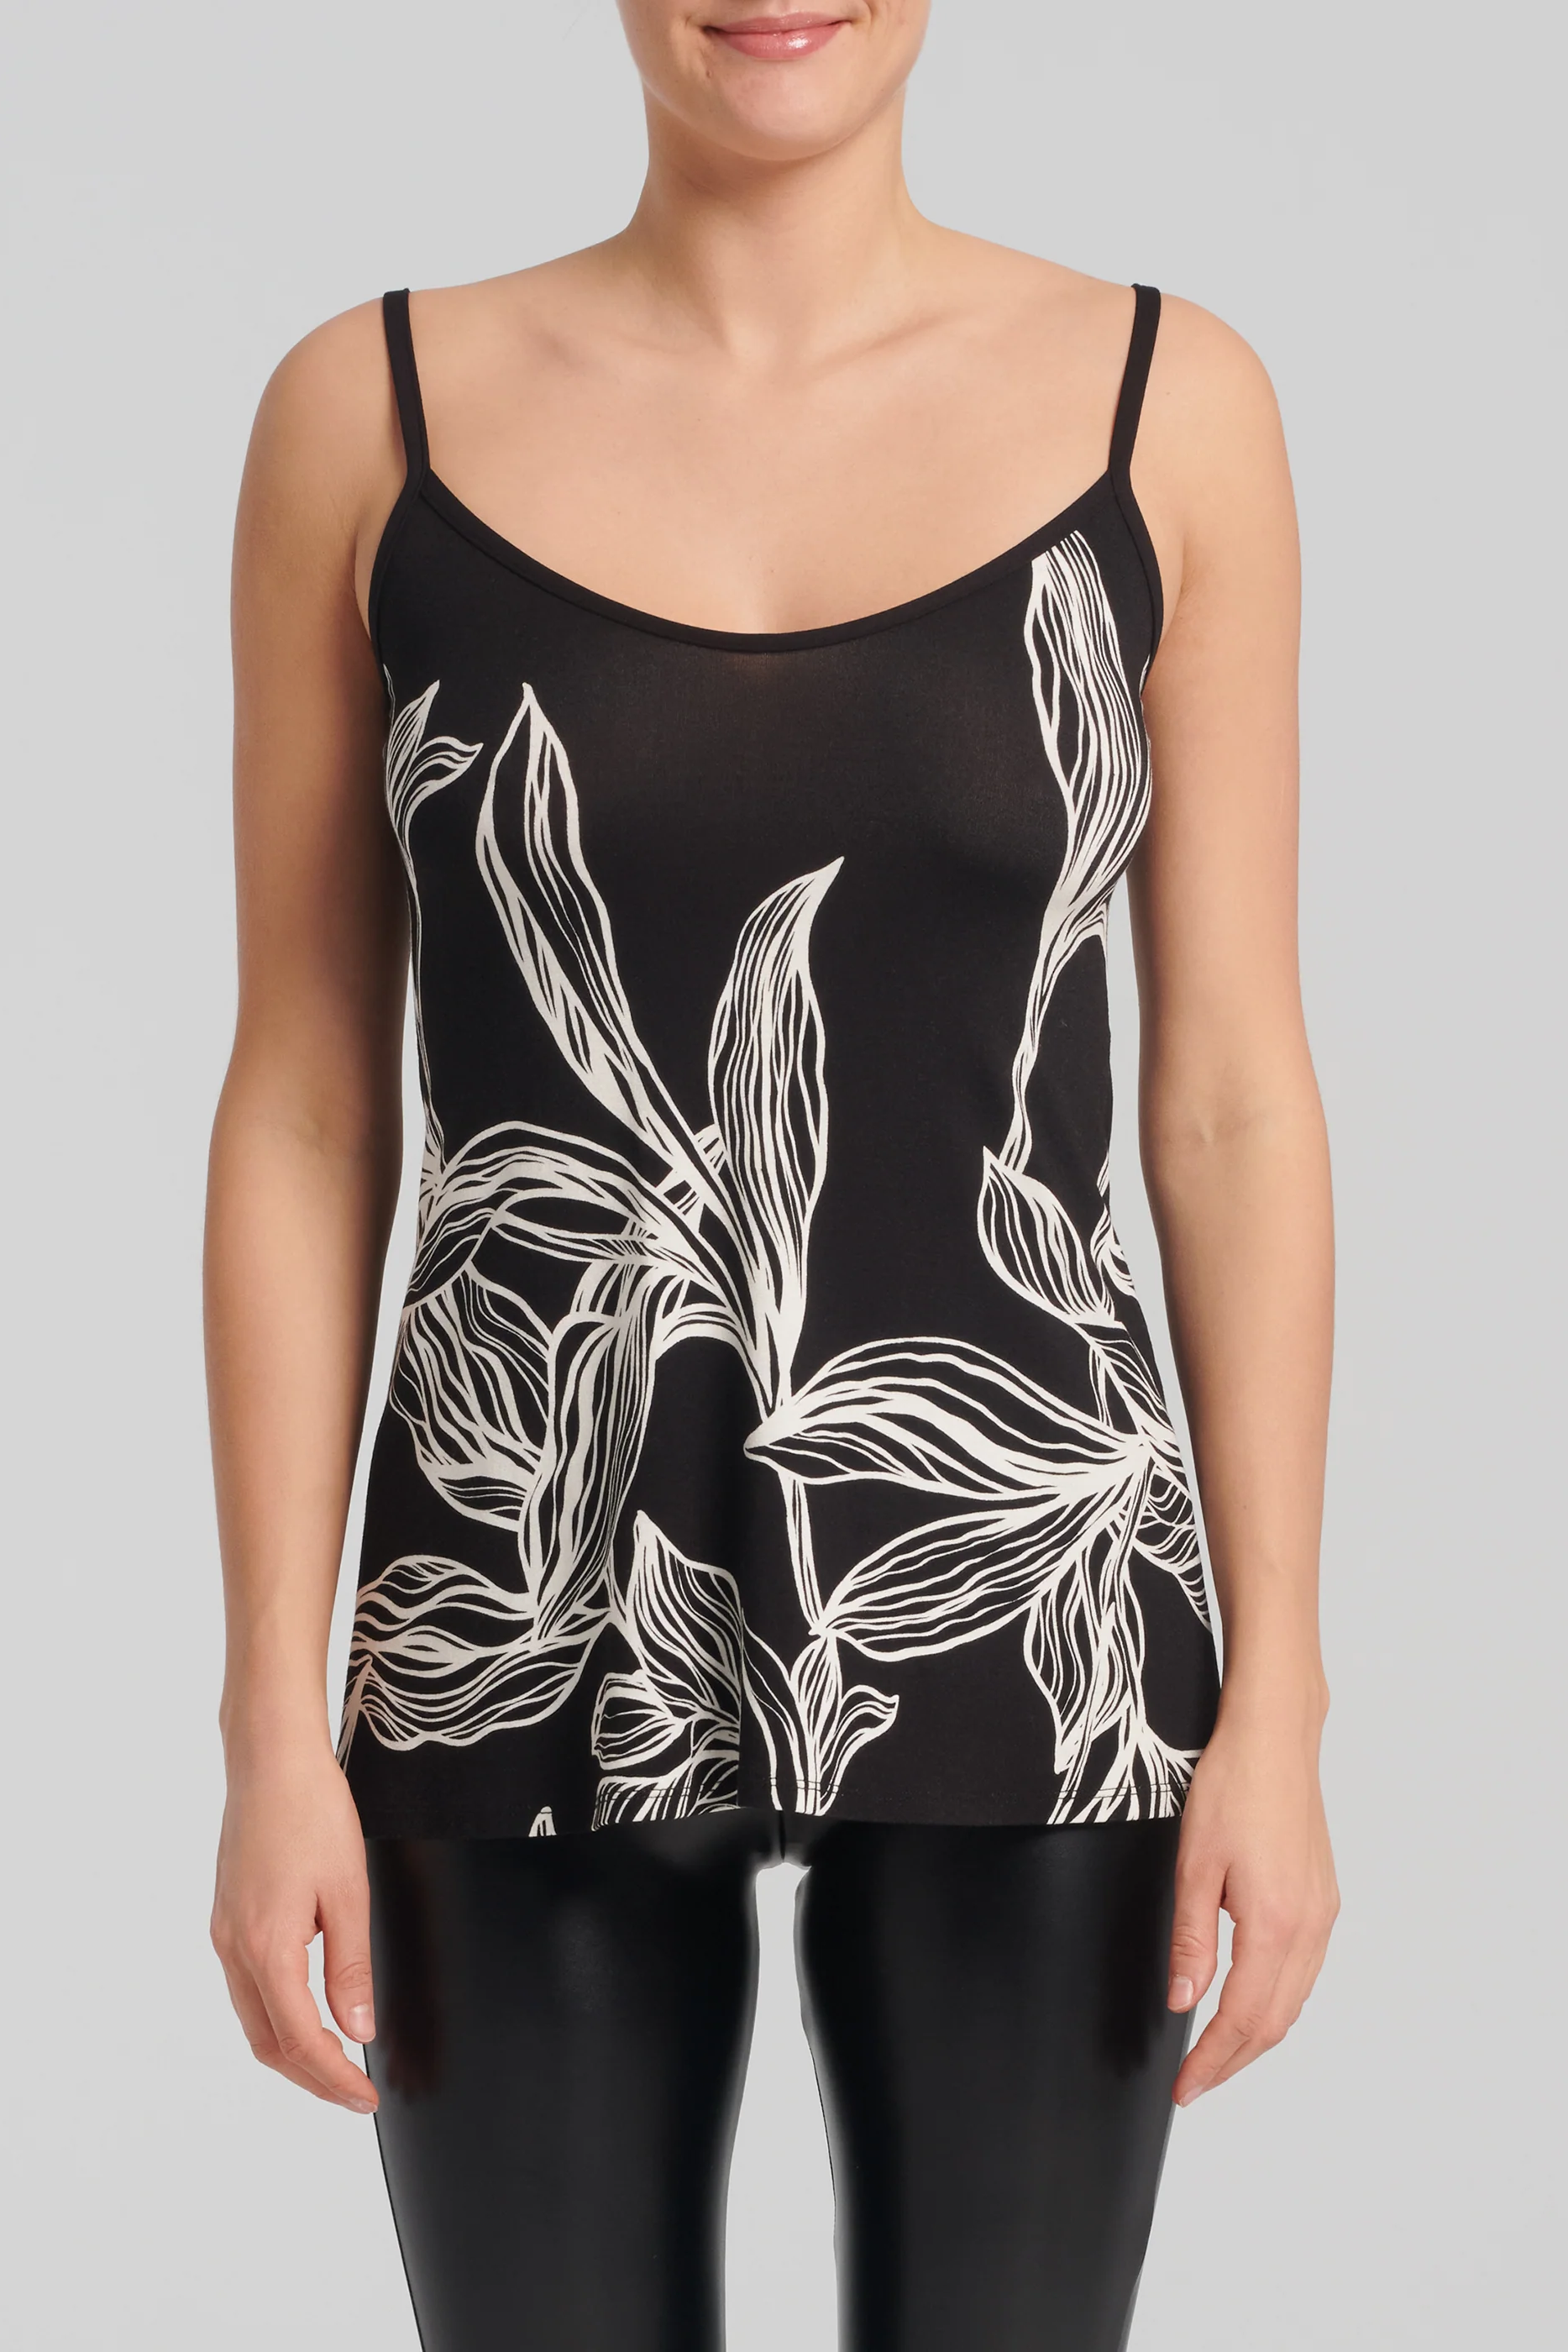 Zaria Top by Kollontai, Black and white leaf print on the front, solid black on the back, spaghetti straps, hip-length, slightly loose fit, sizes XS to XXL, made in Montreal